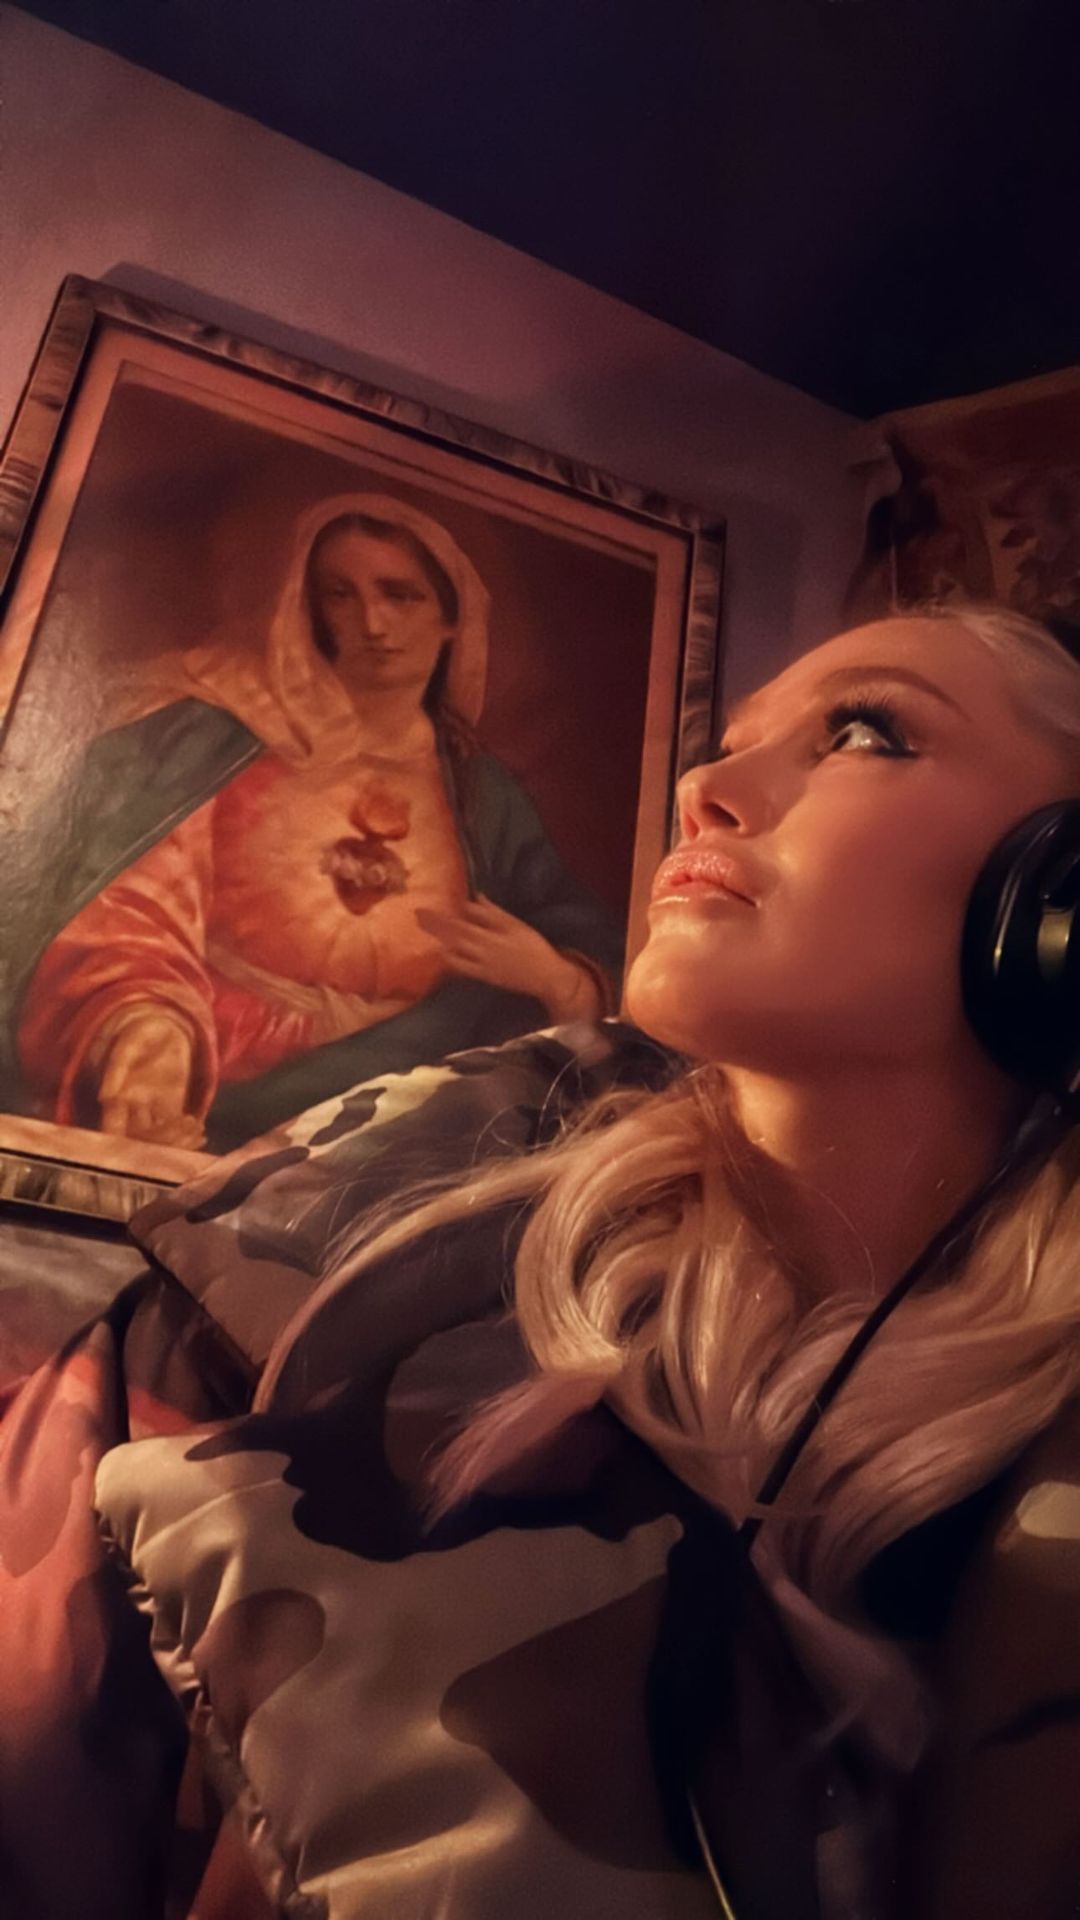 Blake's post was uploaded around the same time Gwen shared a somber photo of her 'praying' while alone in a recording studio